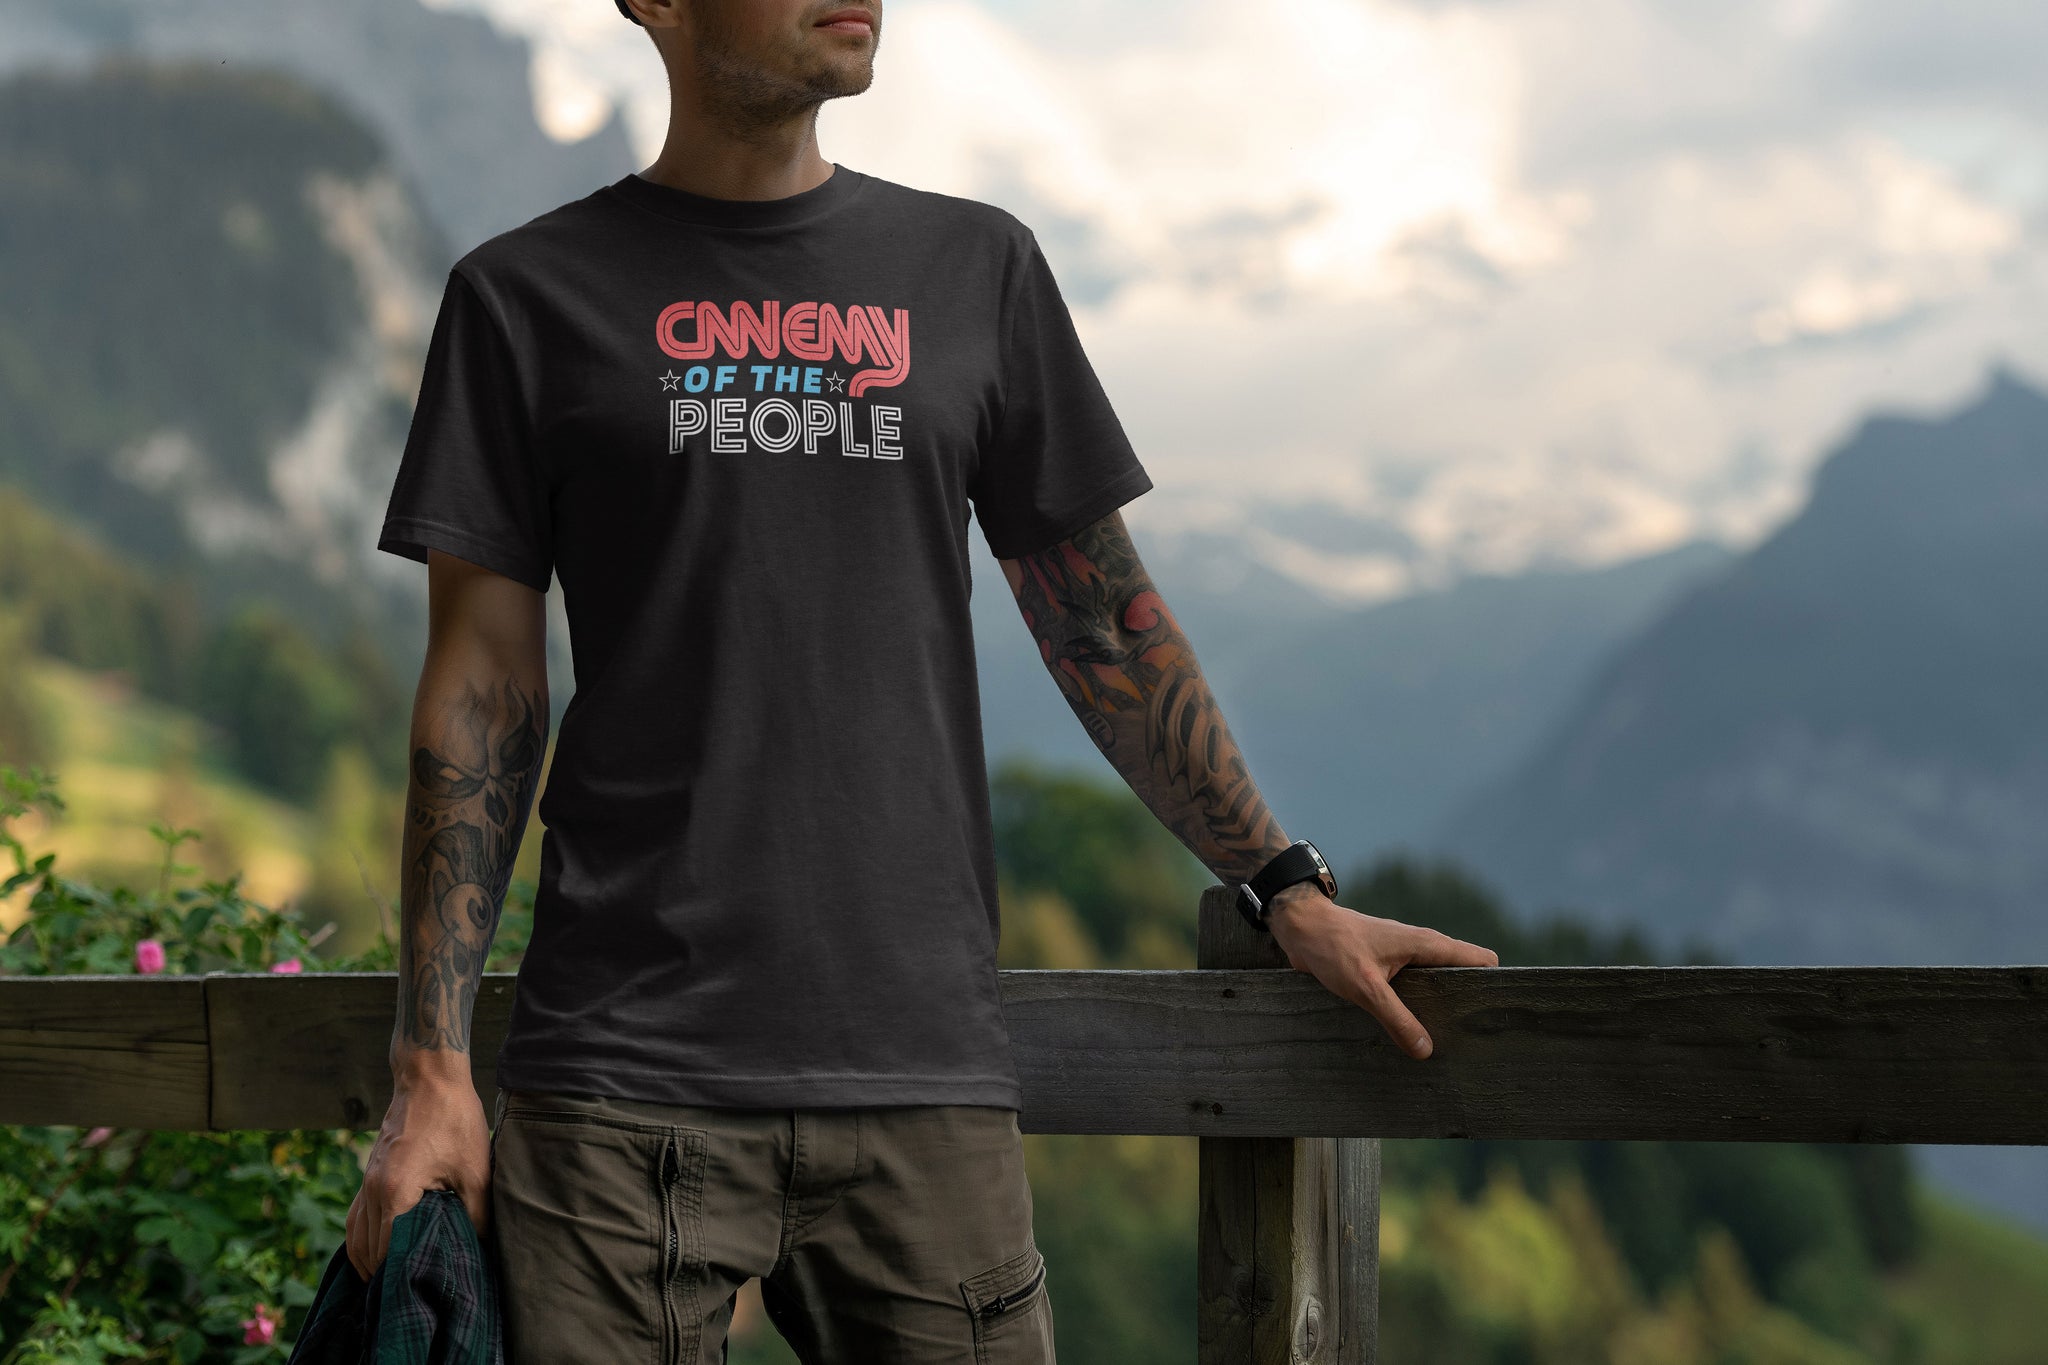 CNN Enemy Of The People T-Shirt